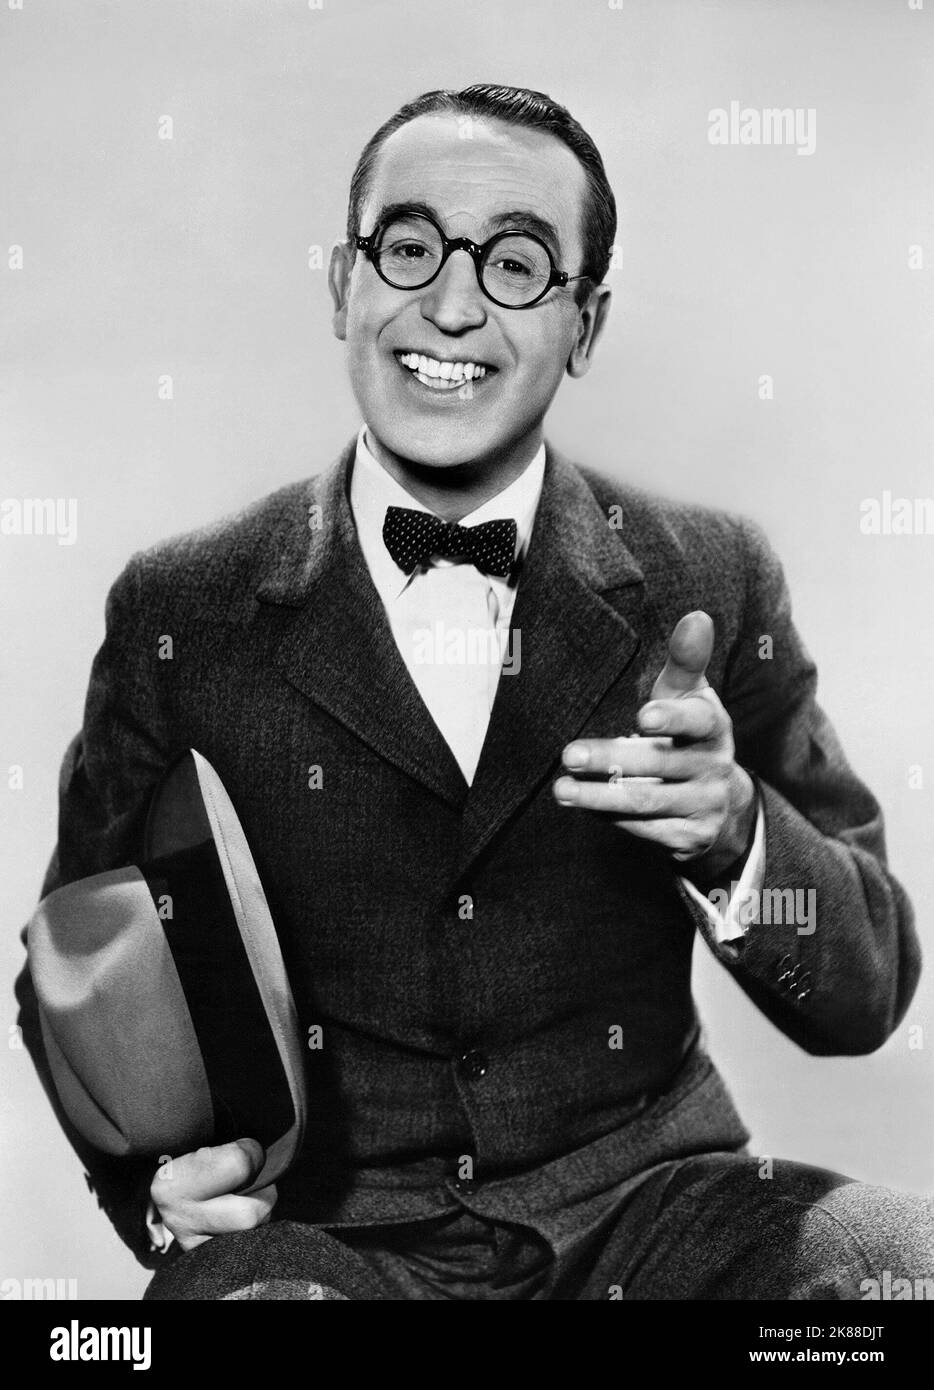 Harold lloyd Black and White Stock Photos & Images - Page 3 - Alamy